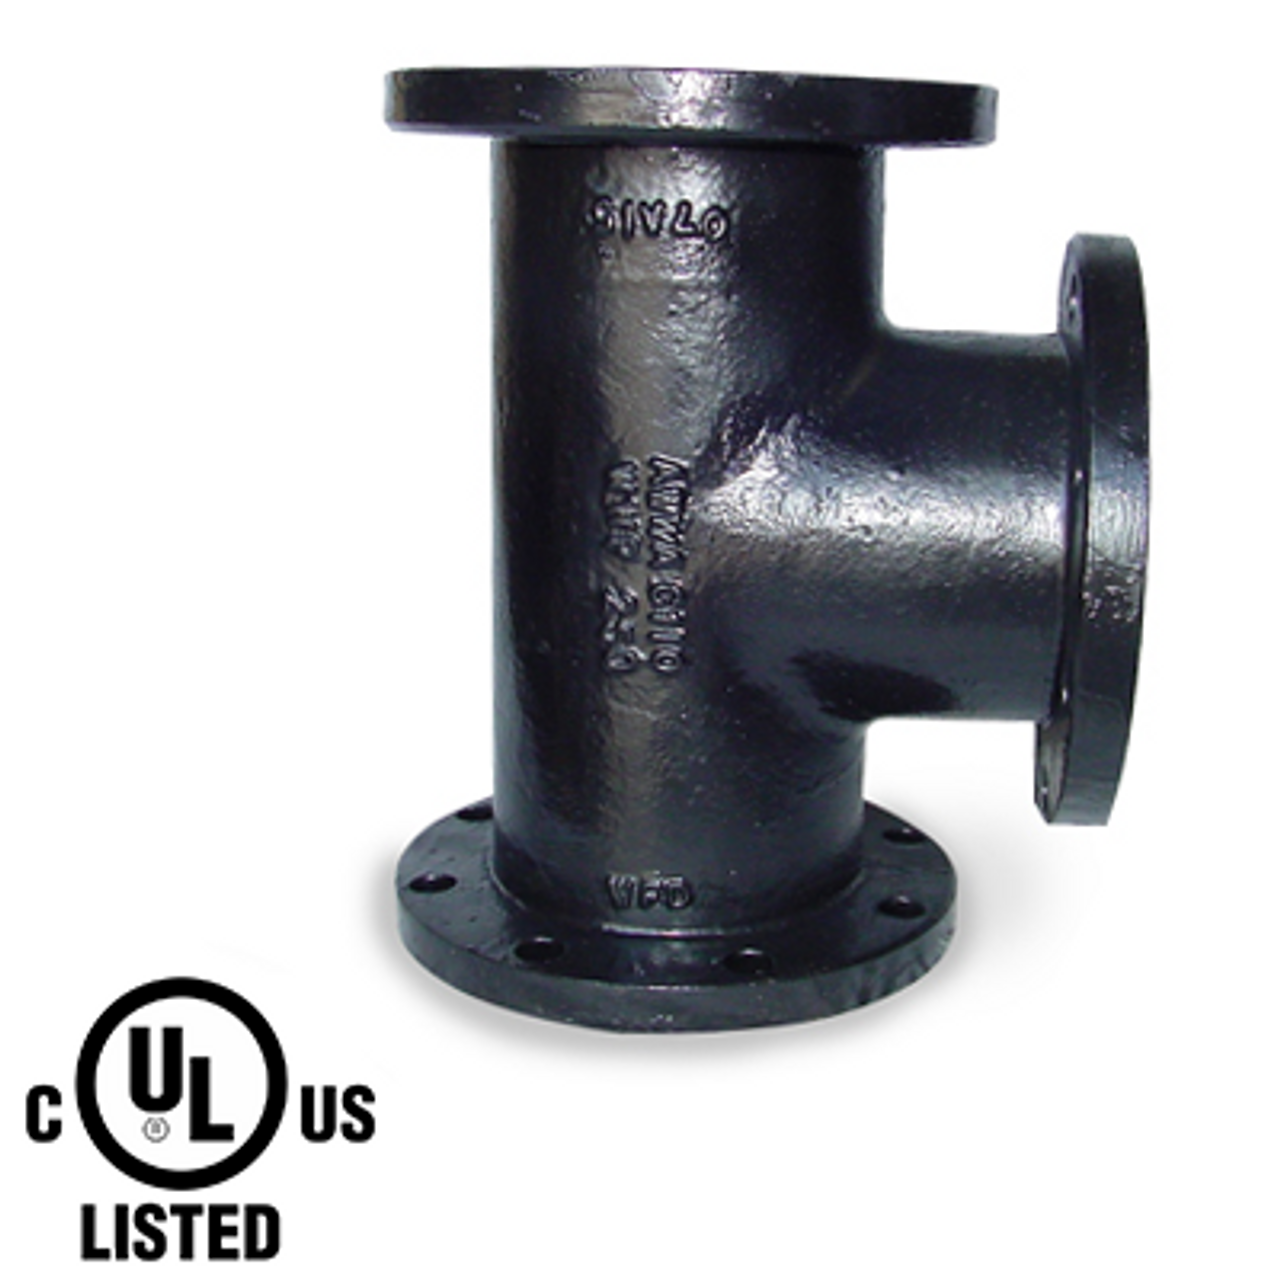 Flanged Black Pipe Fittings 150# Ductile Iron 6" Tees